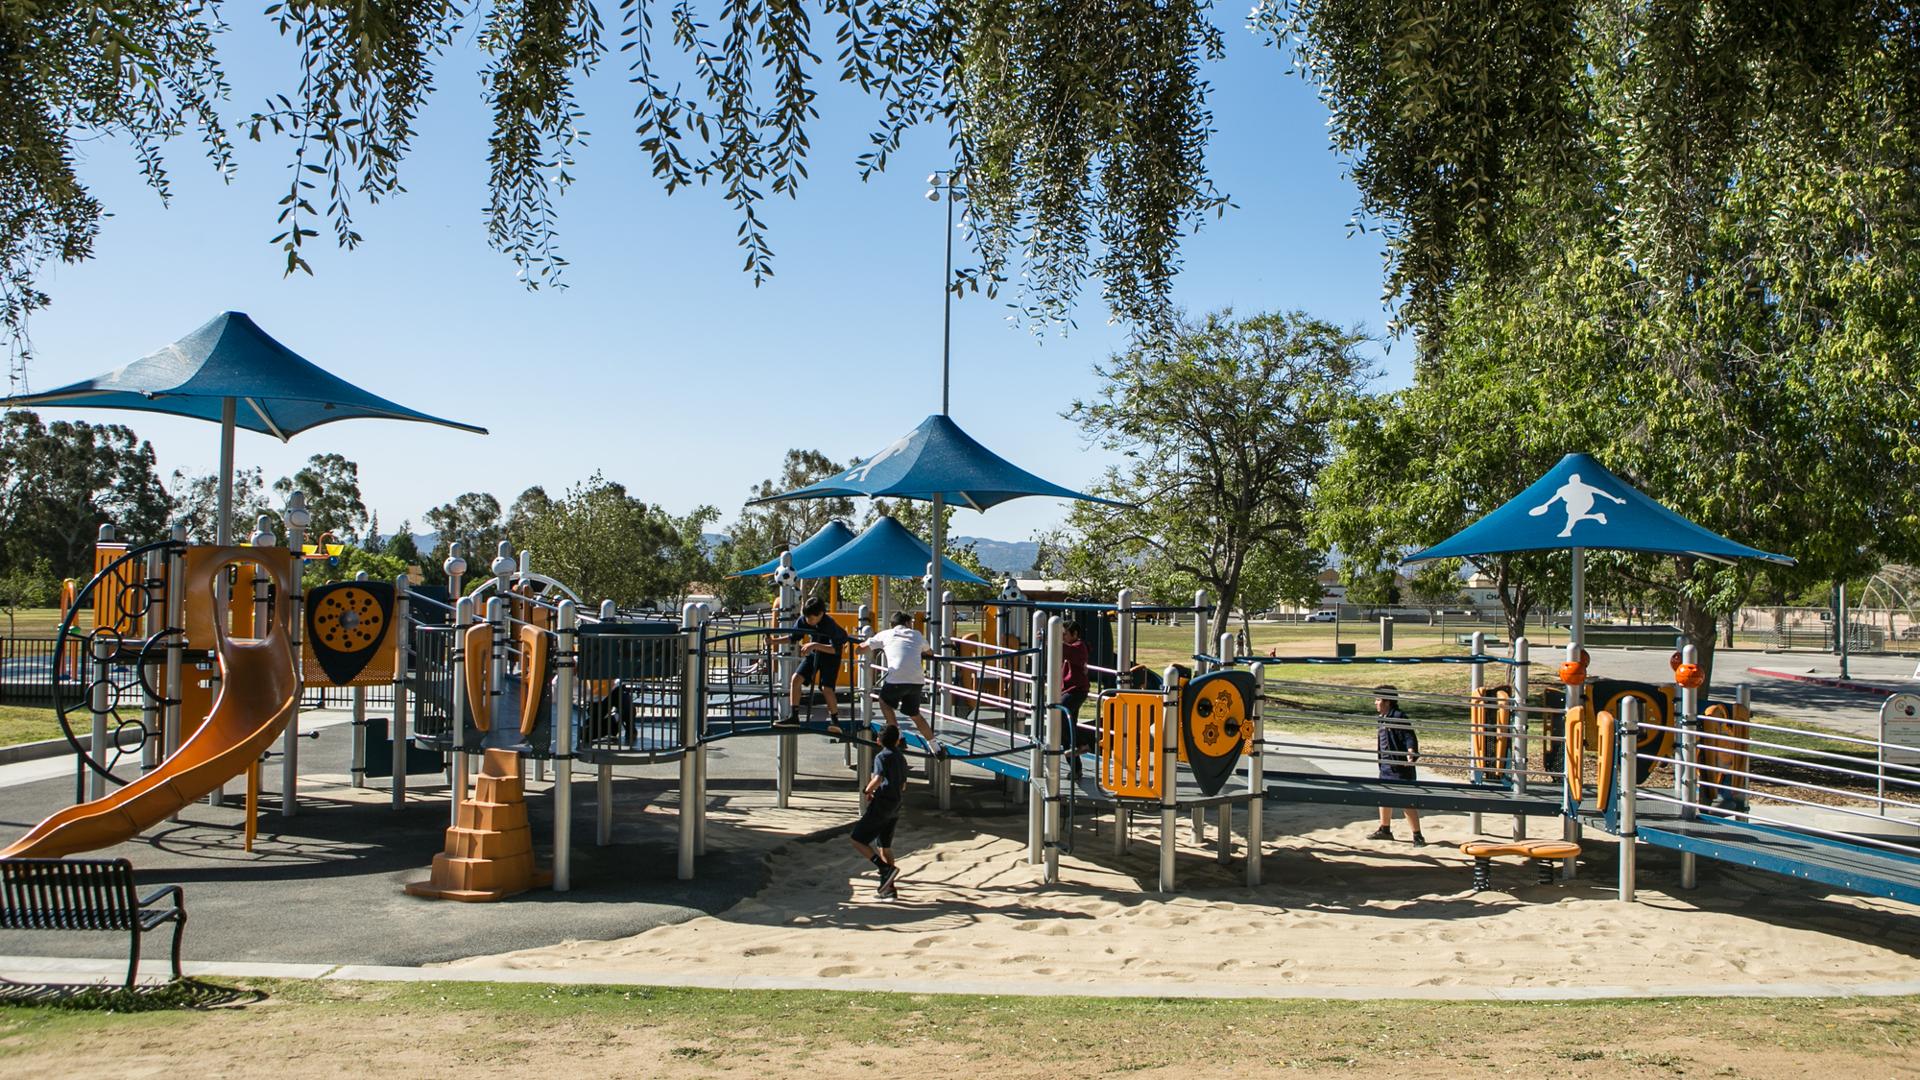 Children playing on sports themed playground.  Blue shade with a custom sports figure cover part of the playground.  The playground includes ramps so kids of all abilities can reach the play elements. 